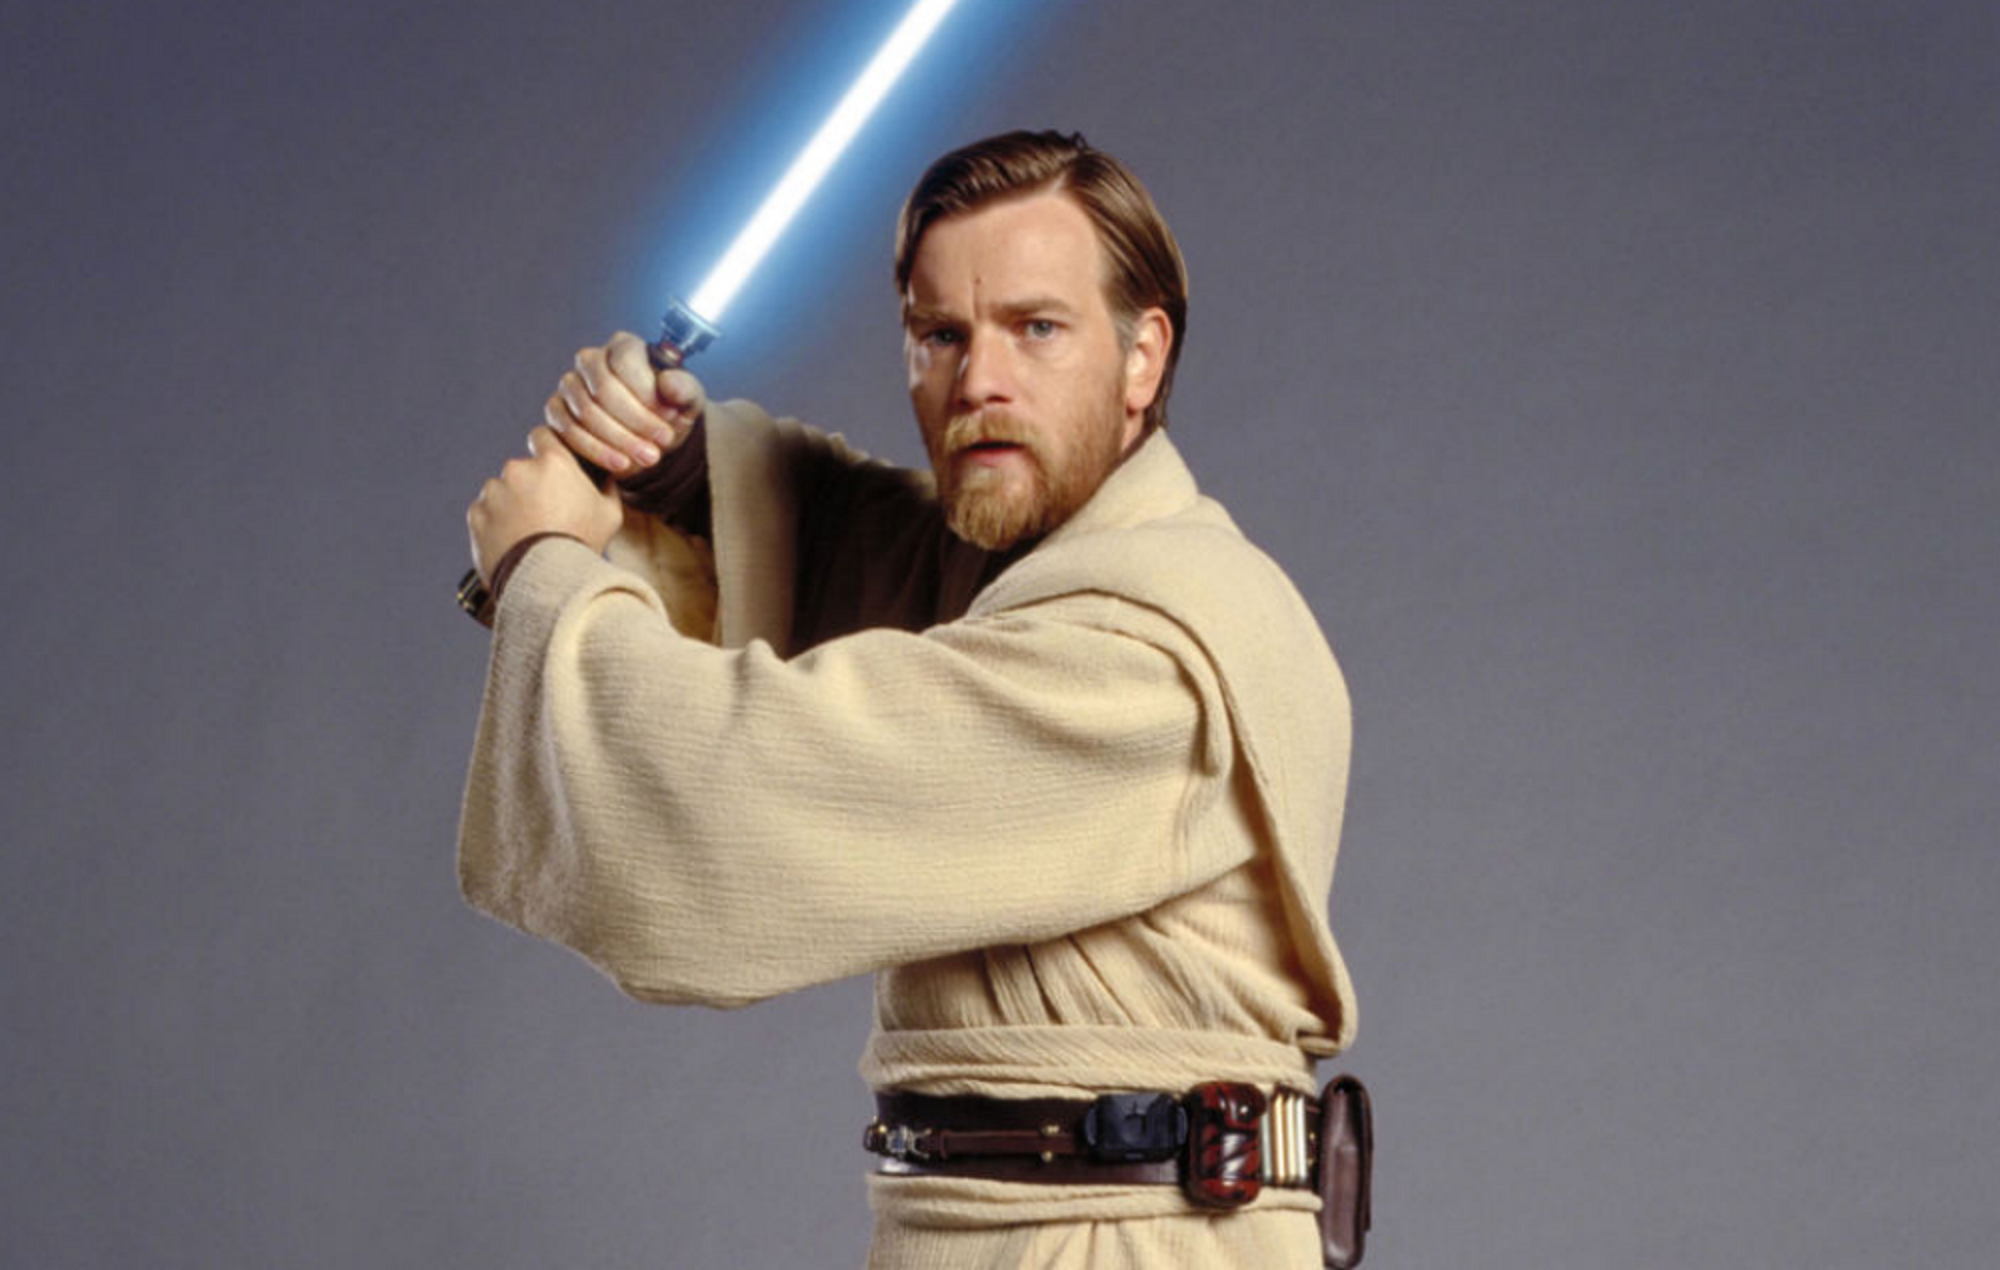 Obi Wan Kenobi' Shares First Look Image From New Series